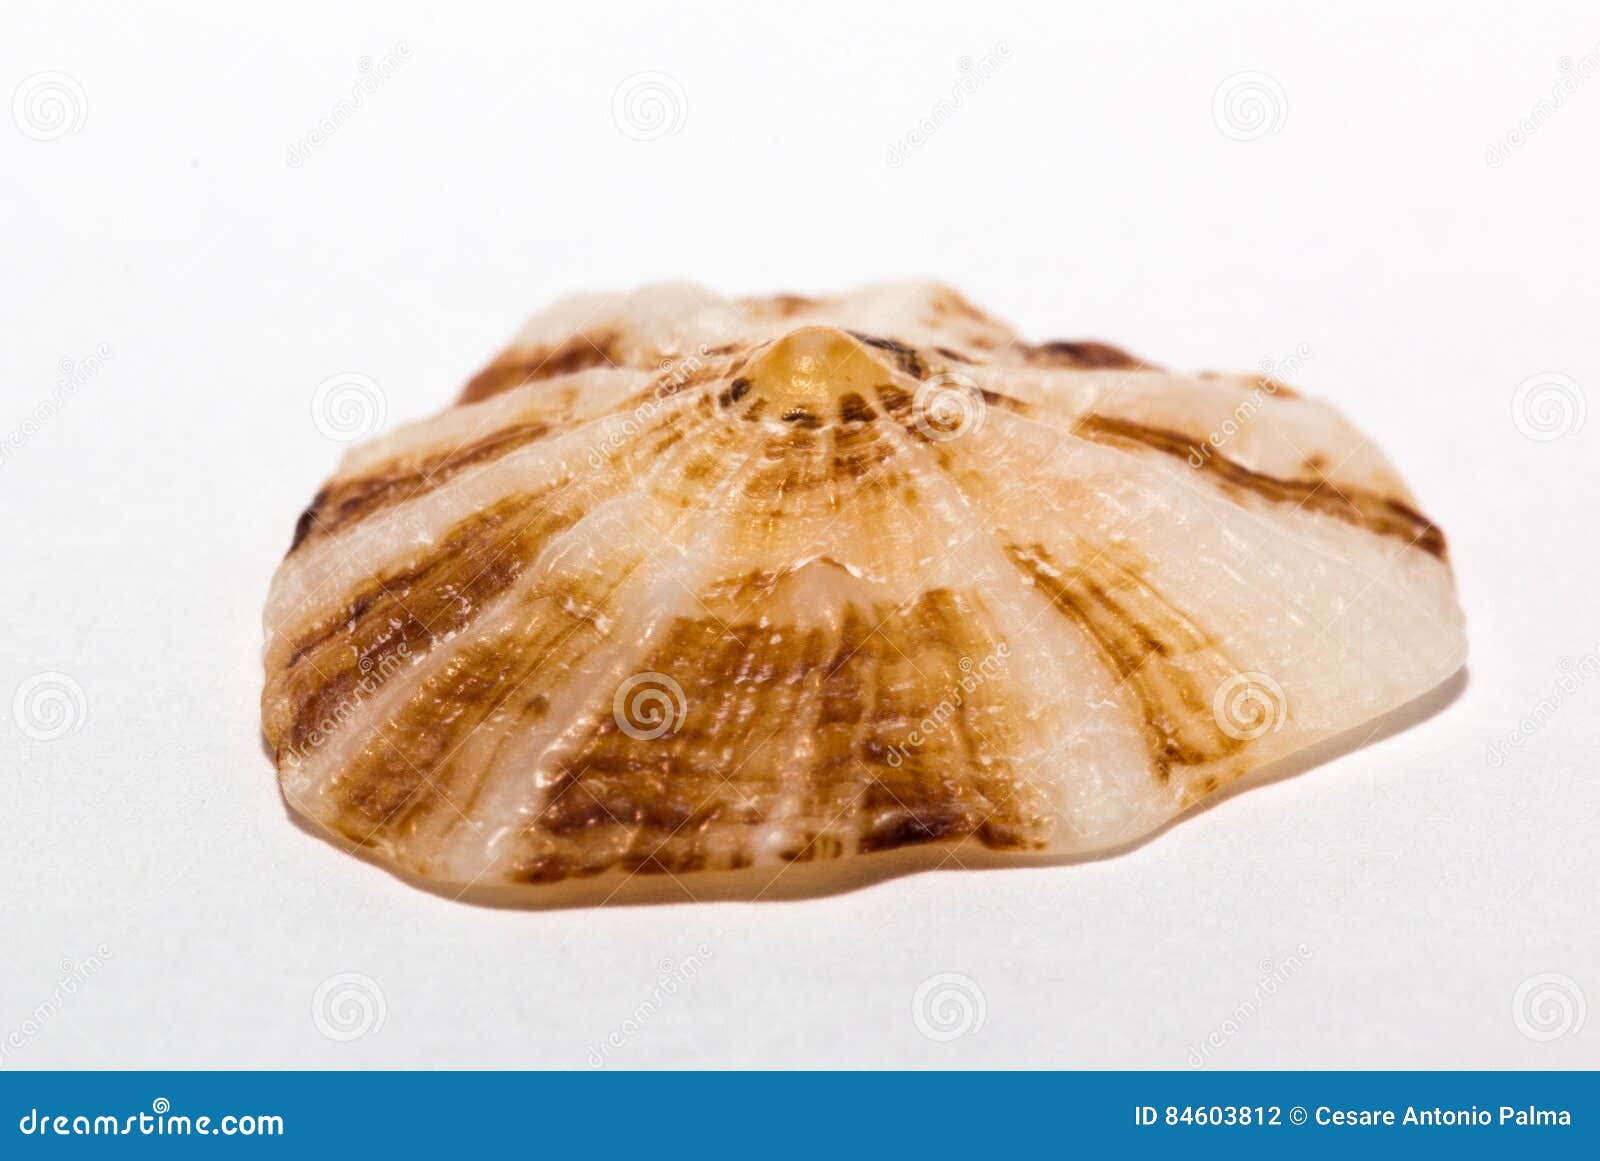 limpet on white background